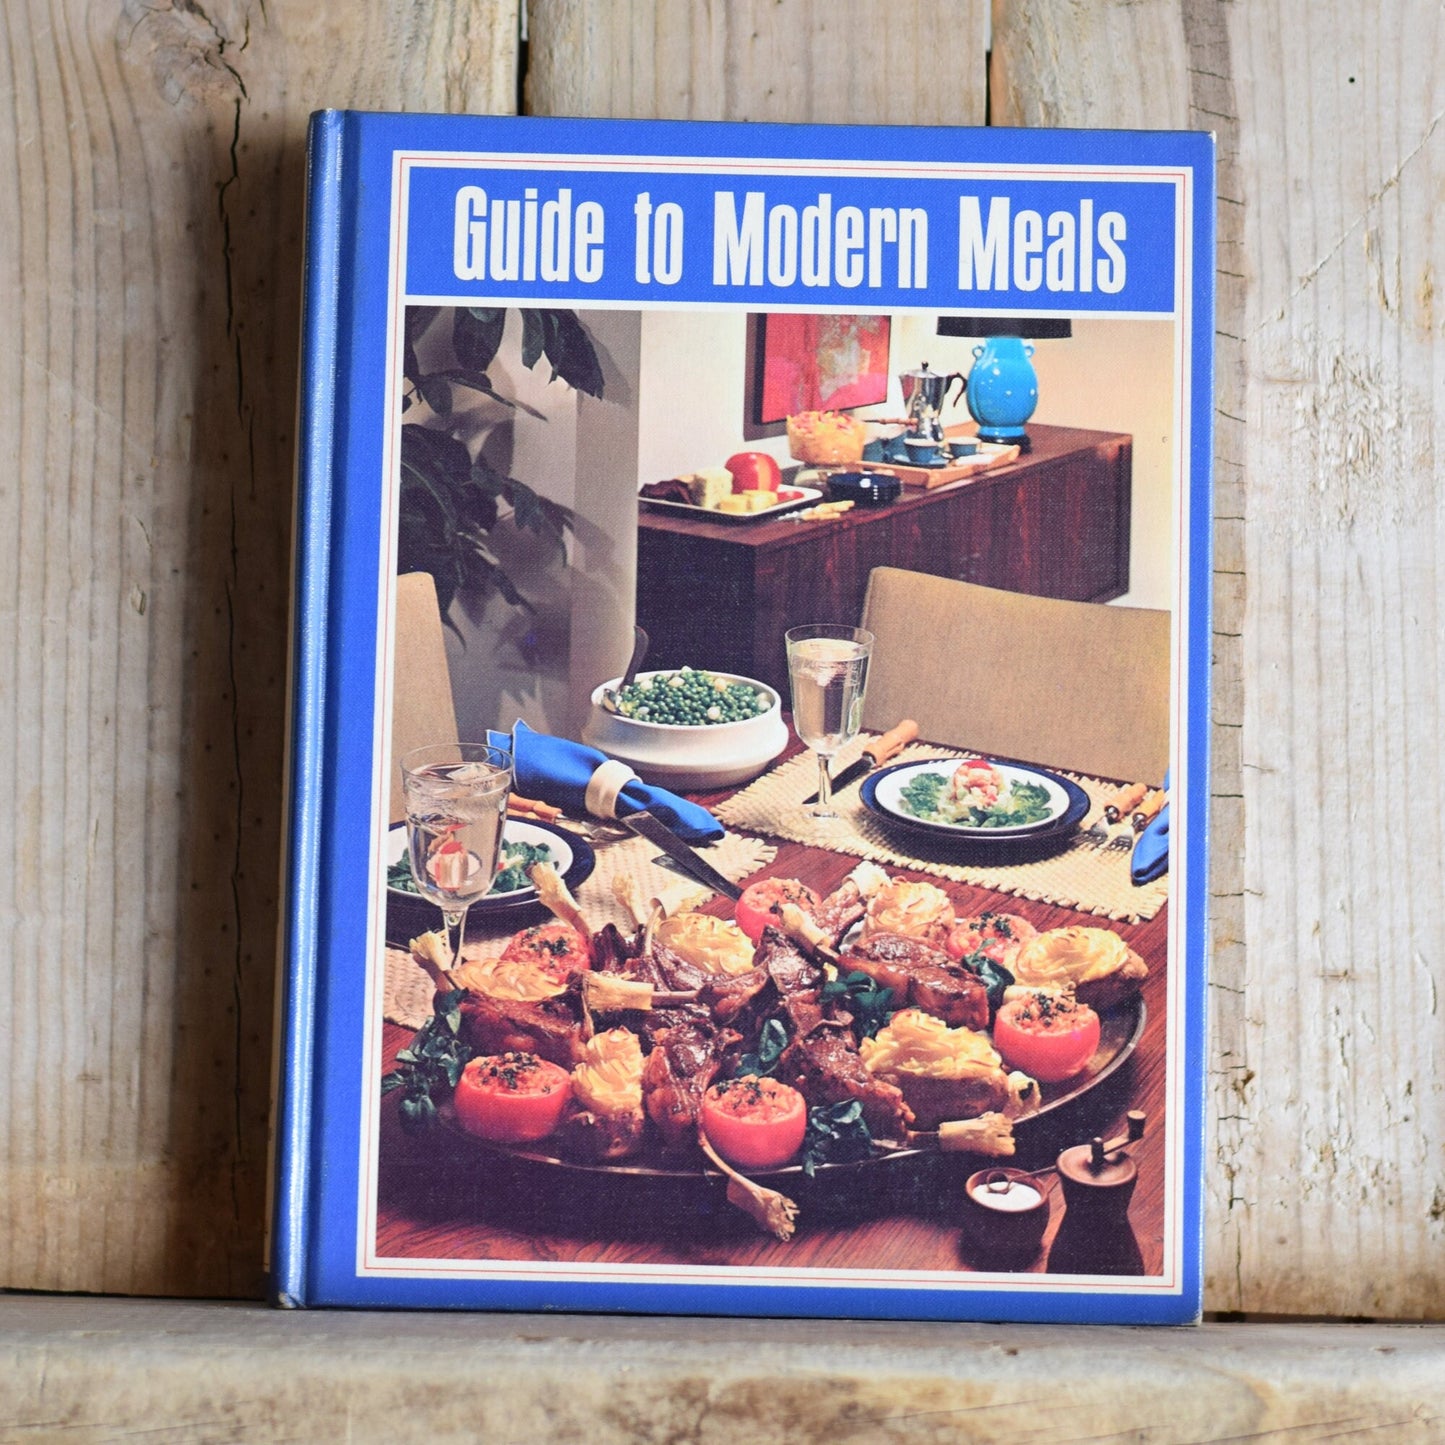 Vintage Cookbook: Shank, Fitch, Chapman, Sickler - Guide to Modern Meals, Second Edition